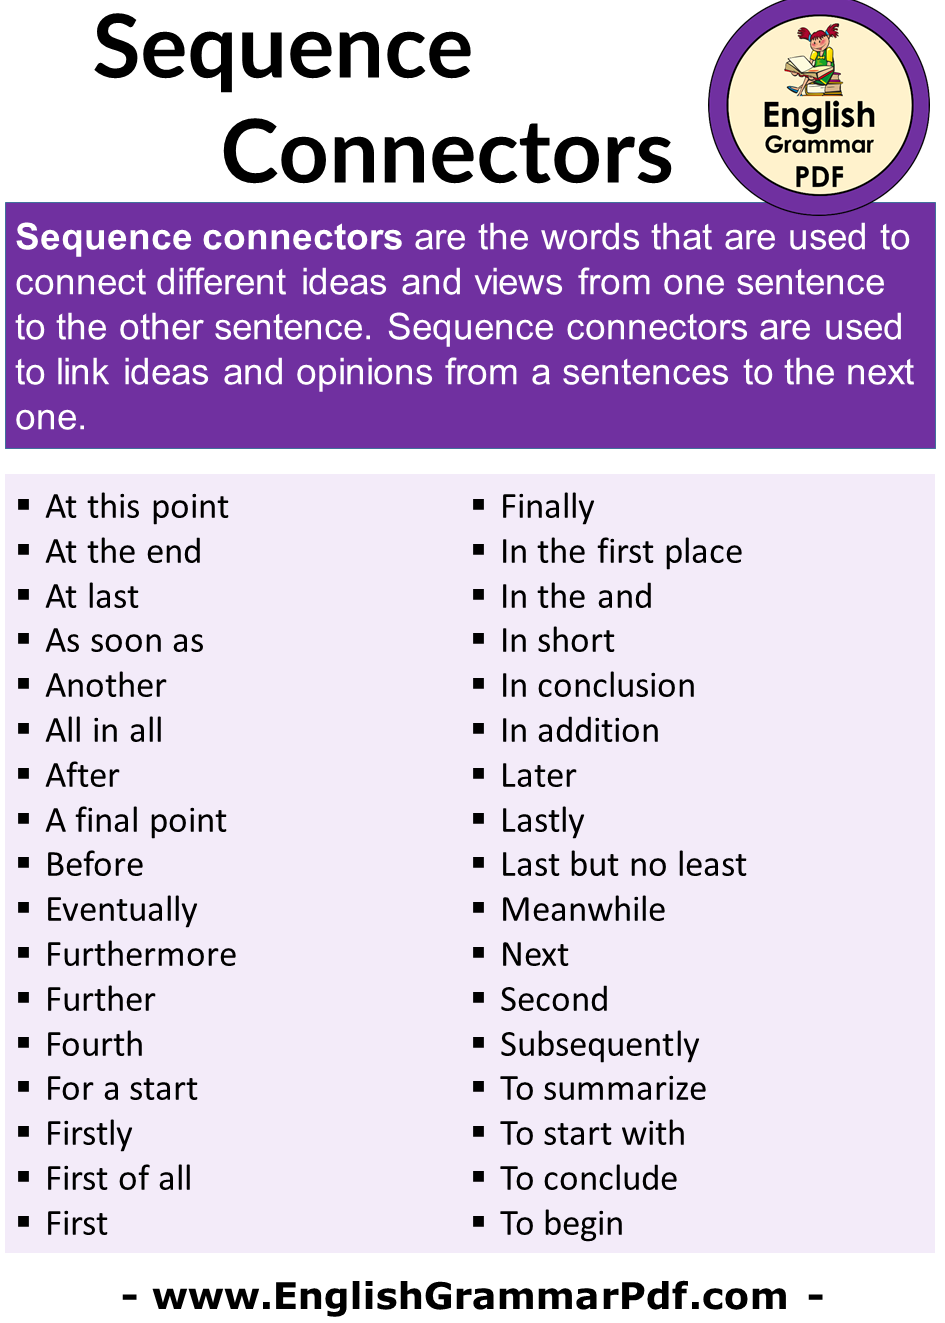 Sequence Connectors Definition and Examples